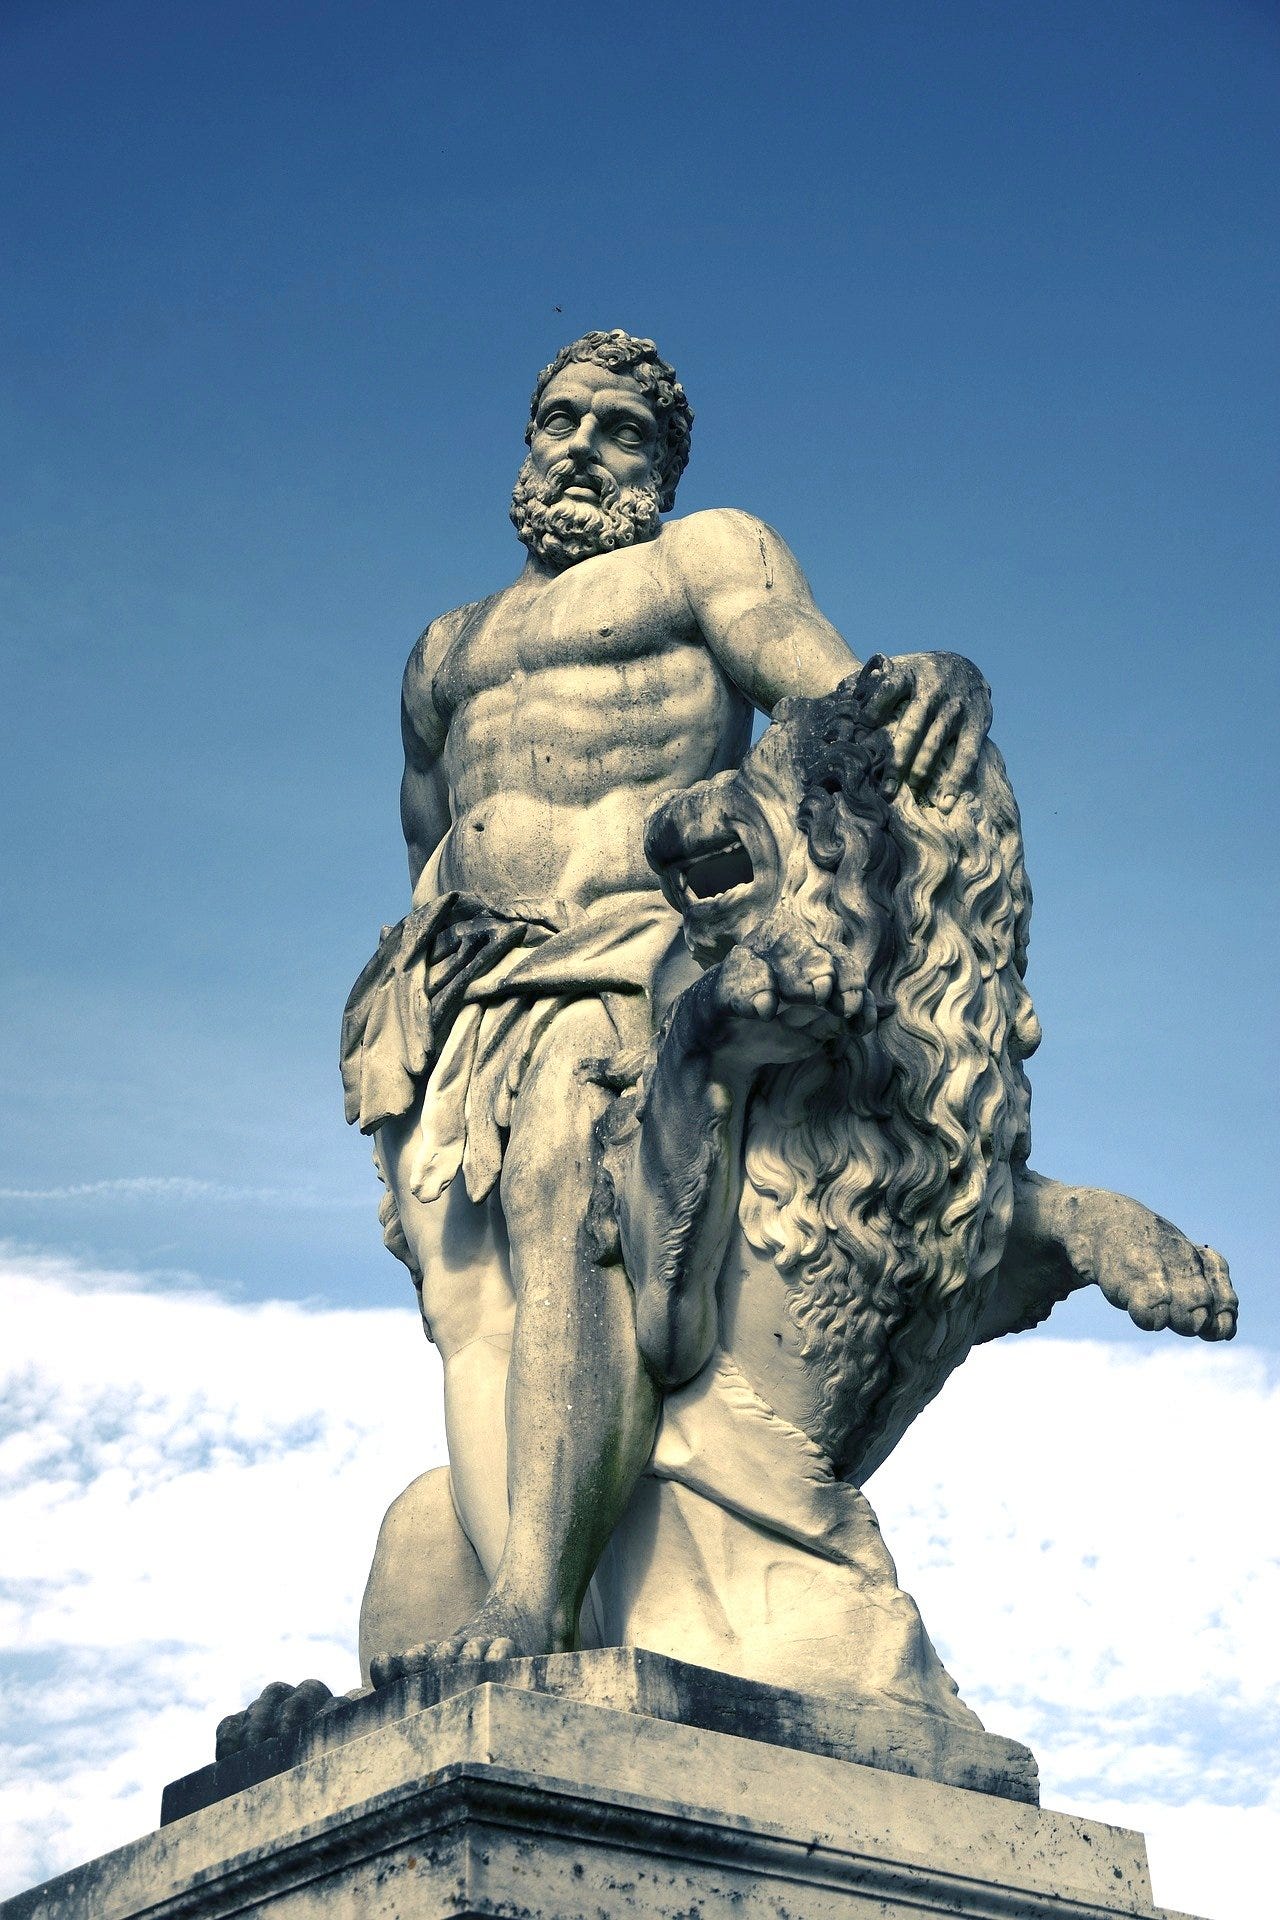 The 8 Most Badass Feats of Strength from the Ancient World - BarBend